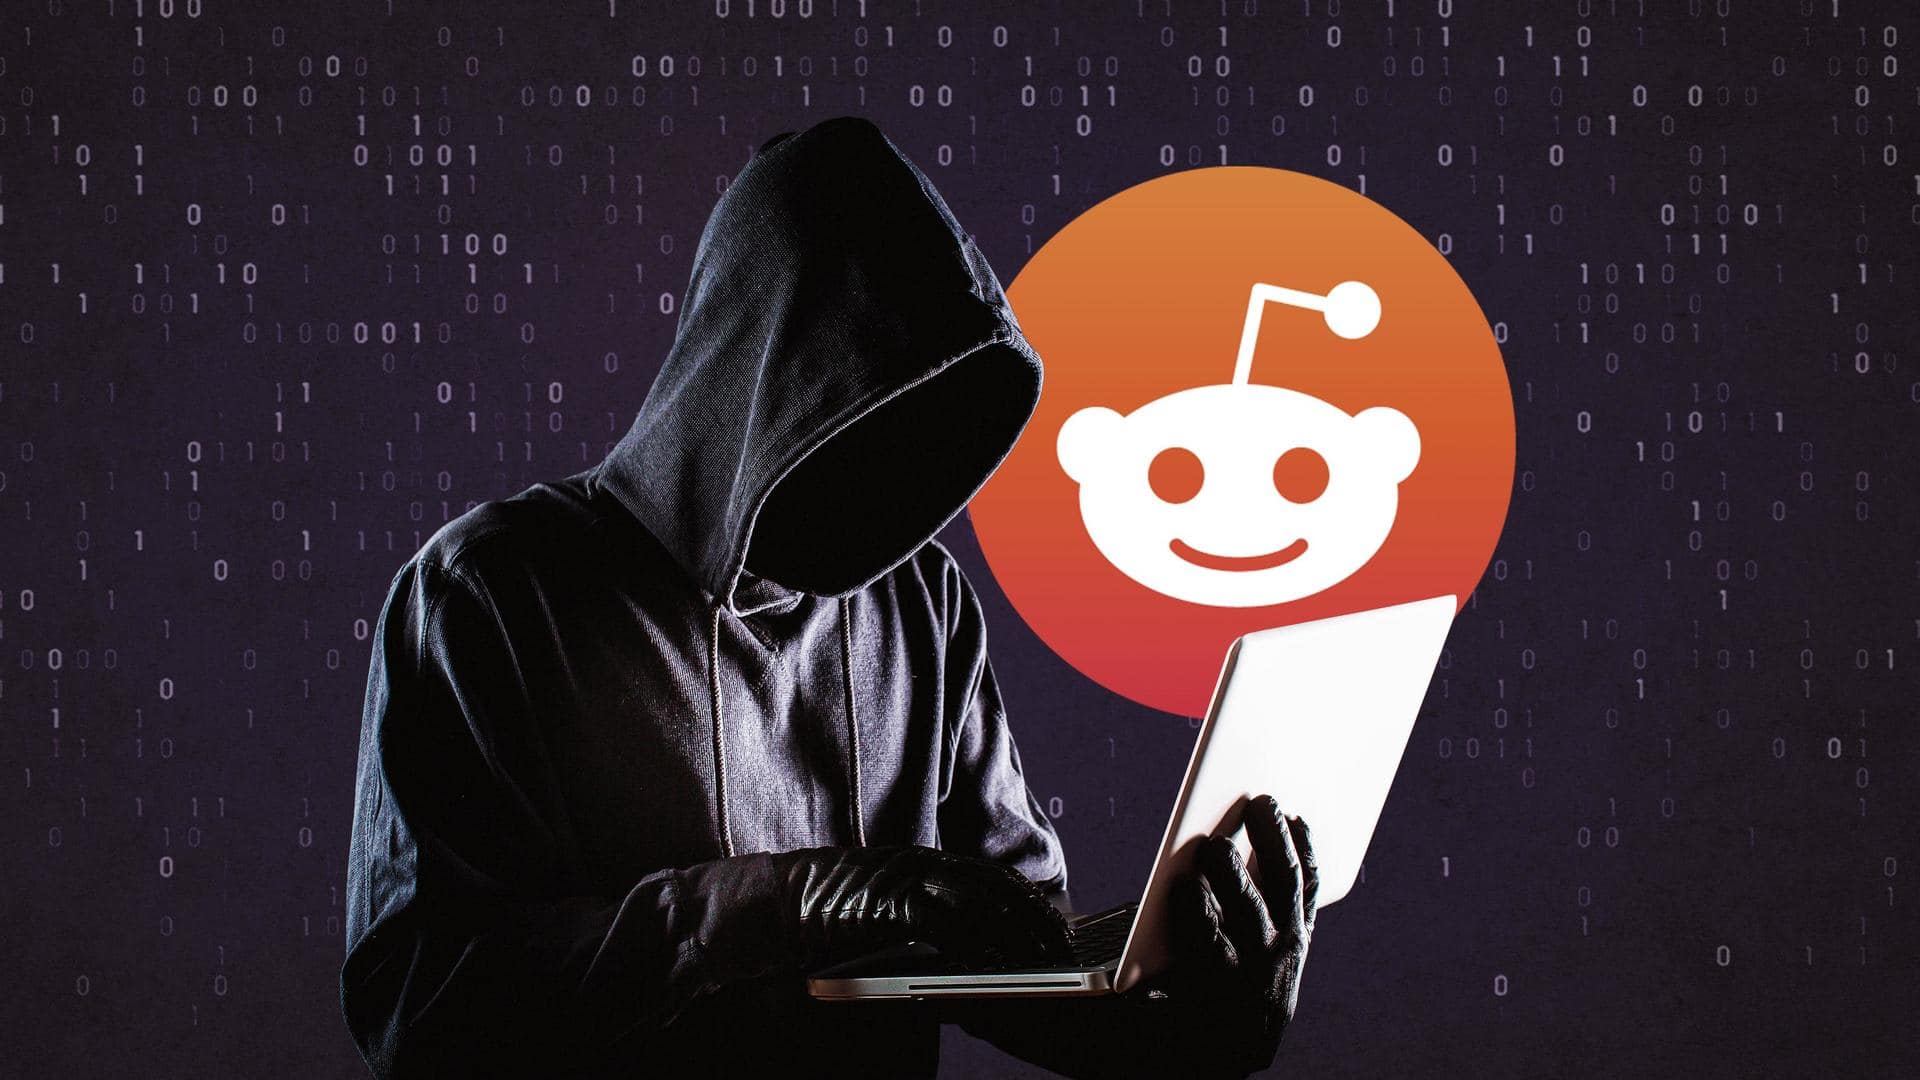 Reddit hacked: Hackers demand $4.5 million and API pricing change